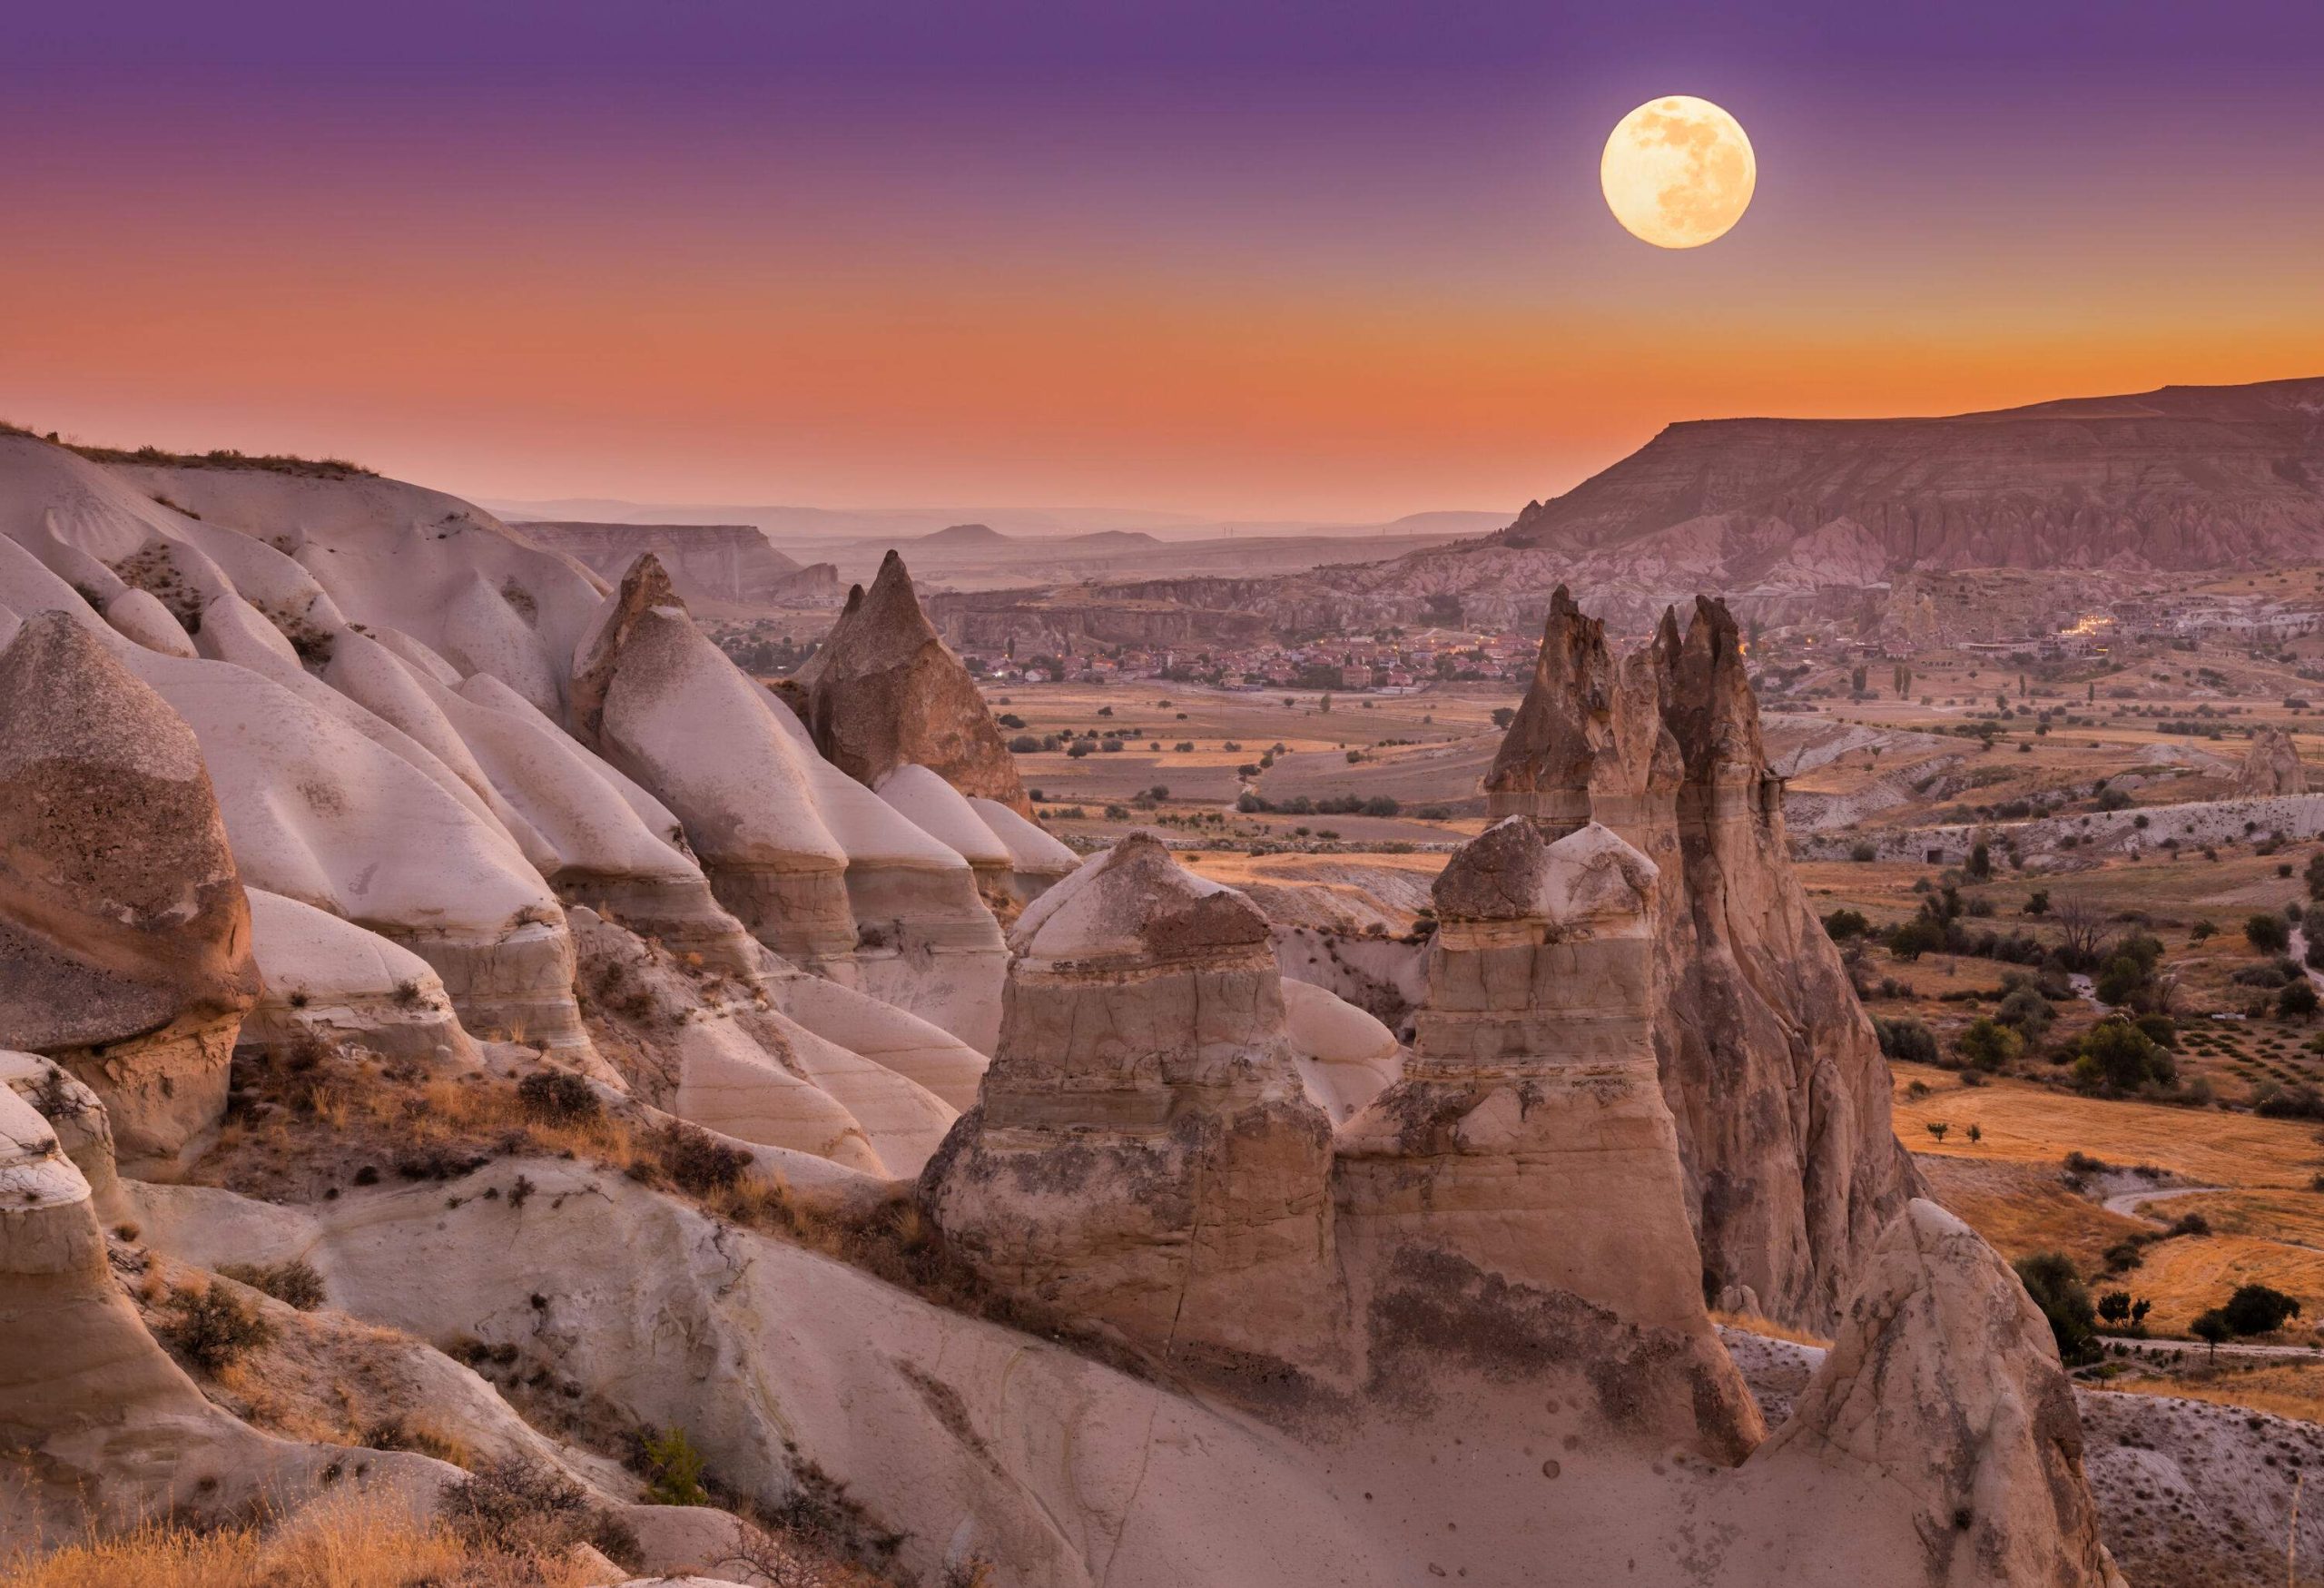 The scenic full moon shines above the cliff on the valley with unusual rock formations.